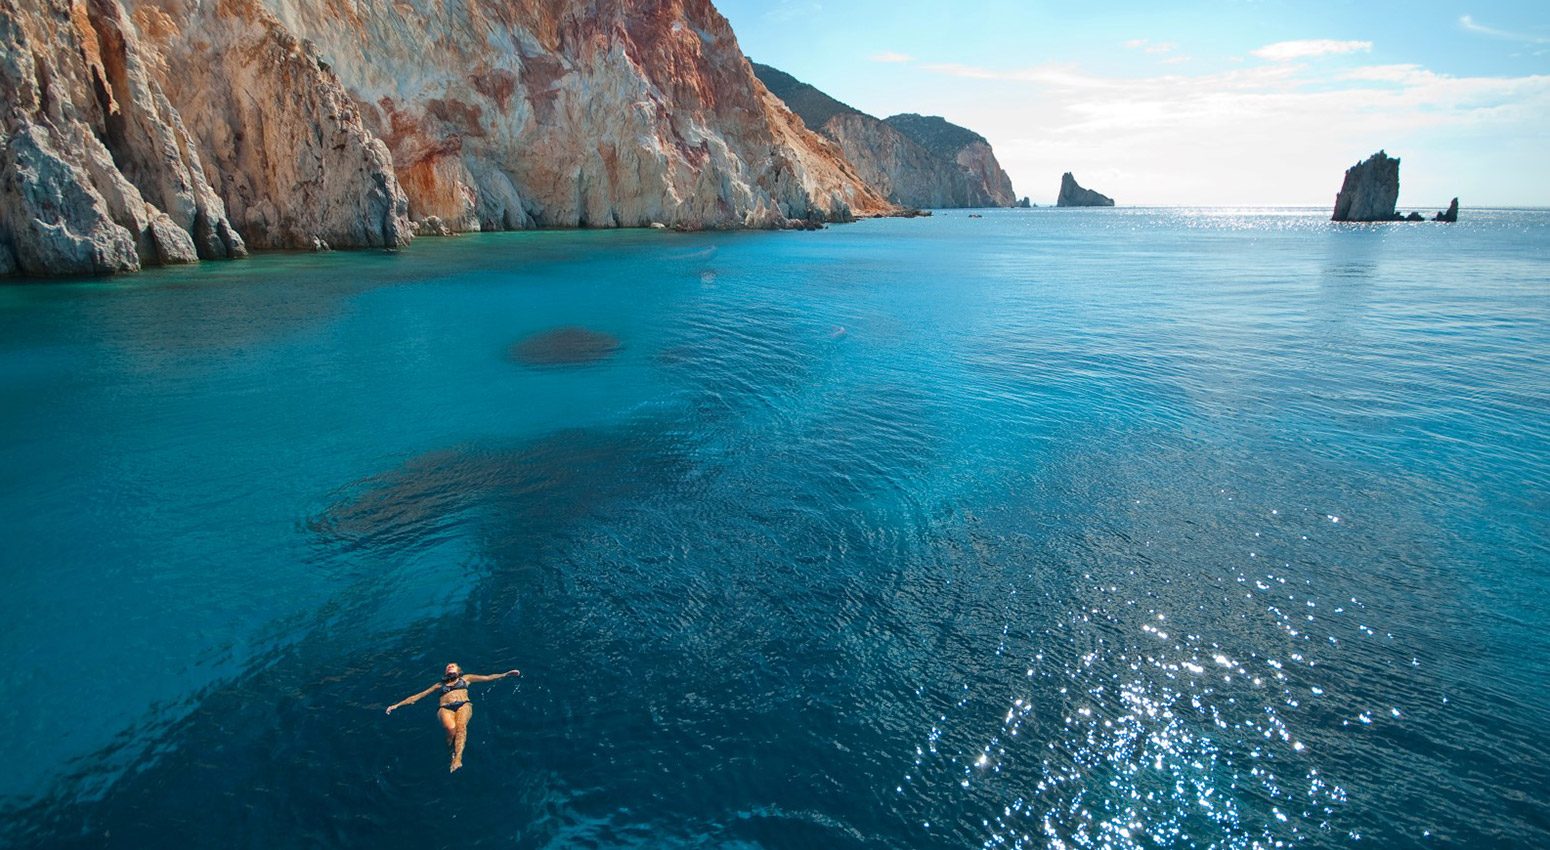 A woman swimming in the turquoise sea with rocky cliffs in the background